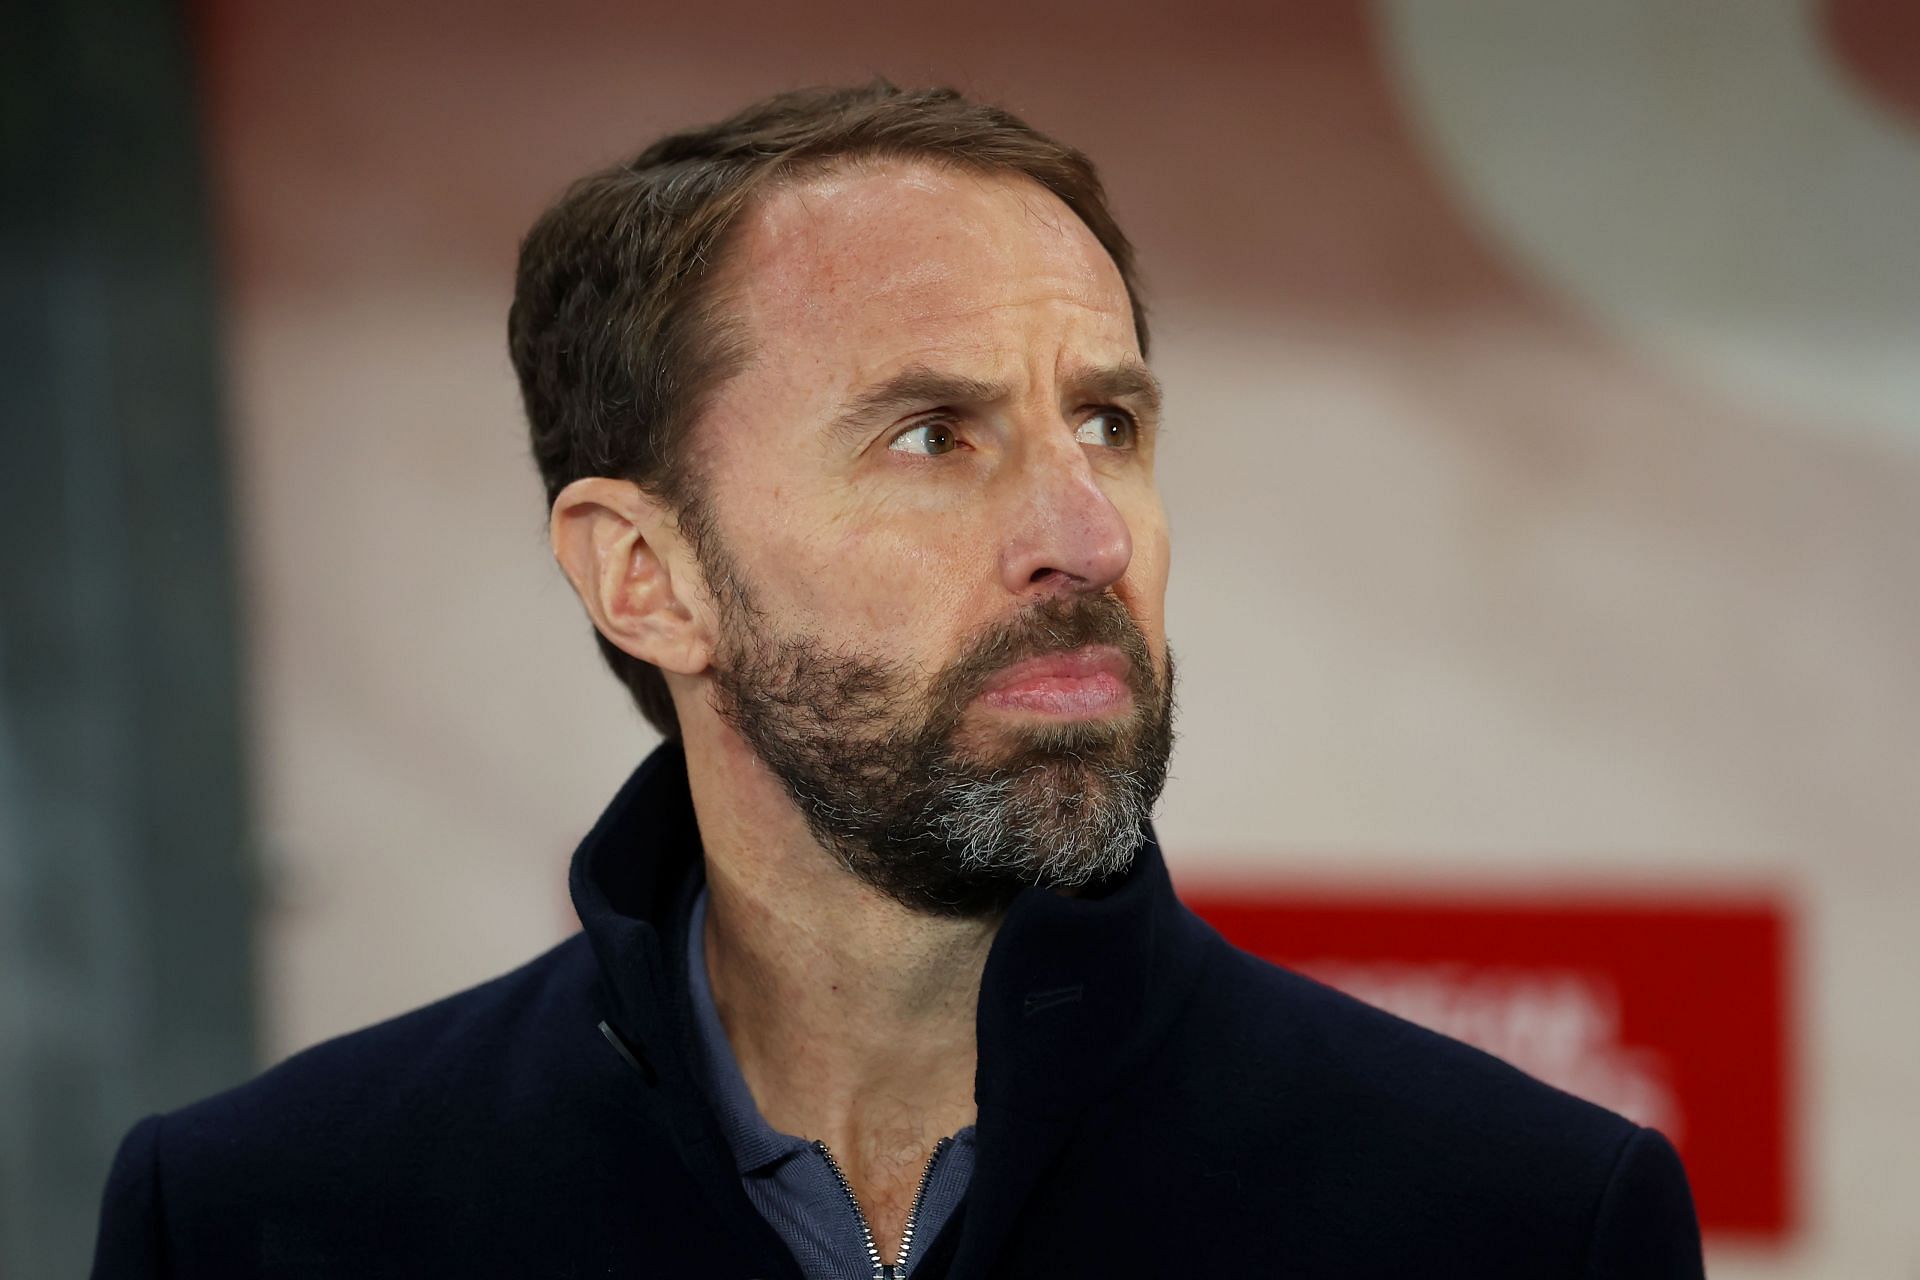 Gareth Southgate might be the chosen one.